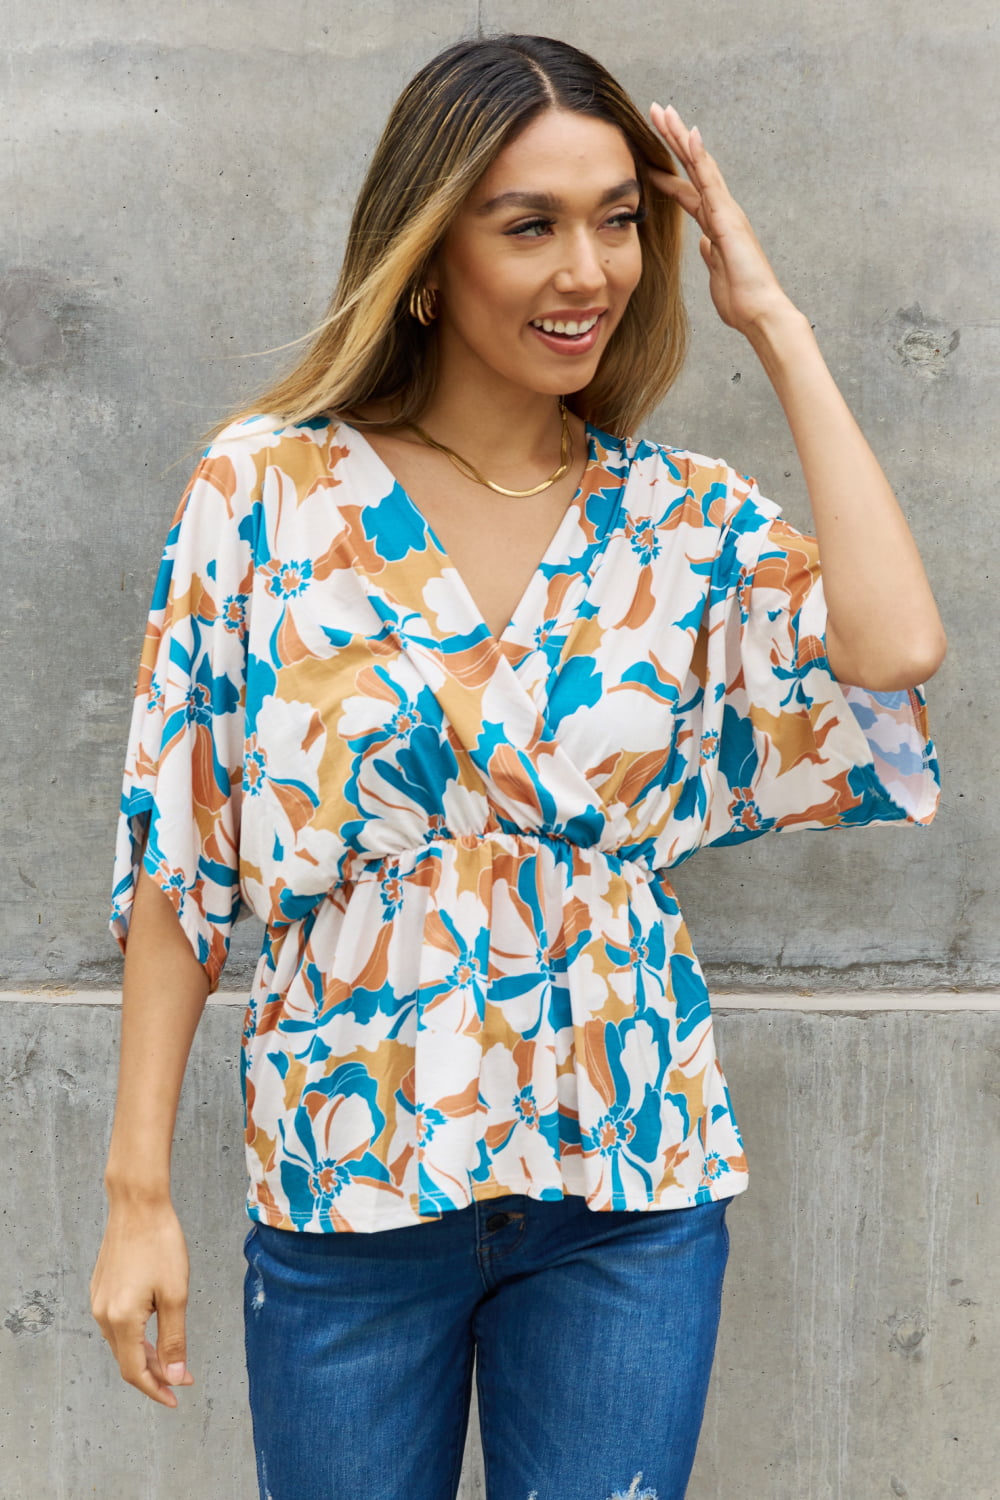 BOMBOM Floral Print Wrap Tunic Top free shipping -Oh Em Gee Boutique